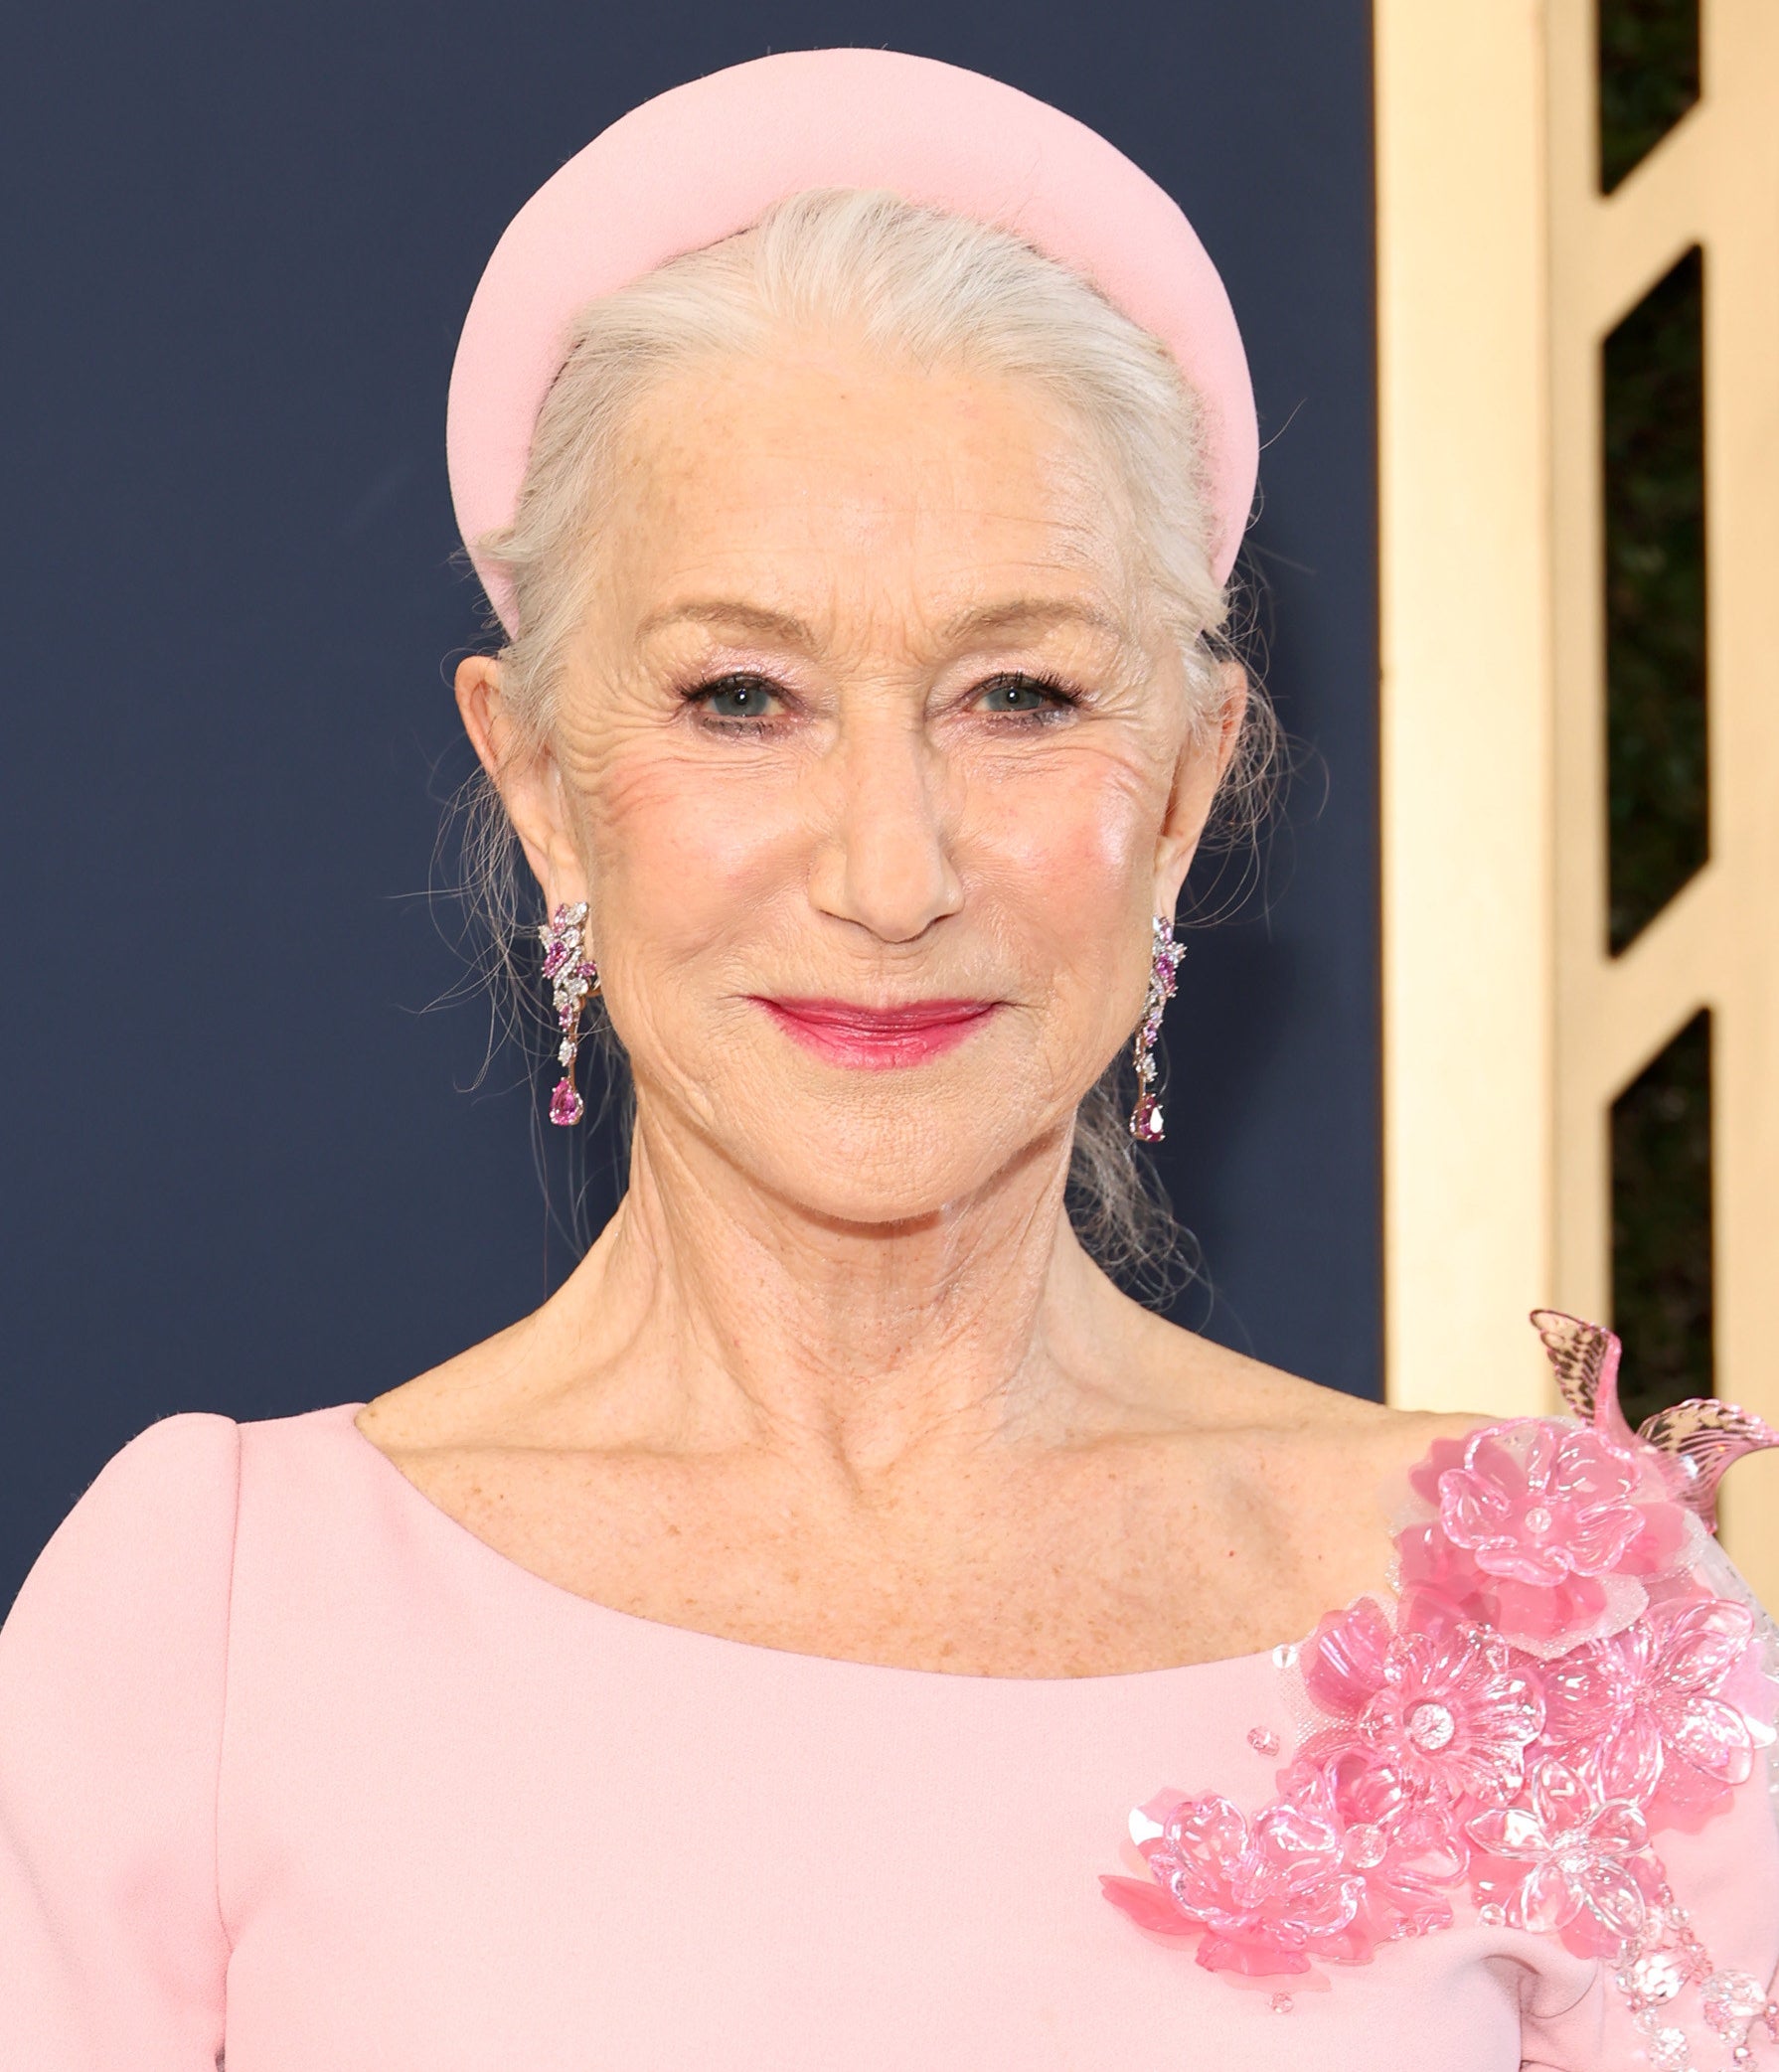 Helen Mirren attends the 28th Annual Screen Actors Guild Awards at Barker Hangar on February 27, 2022